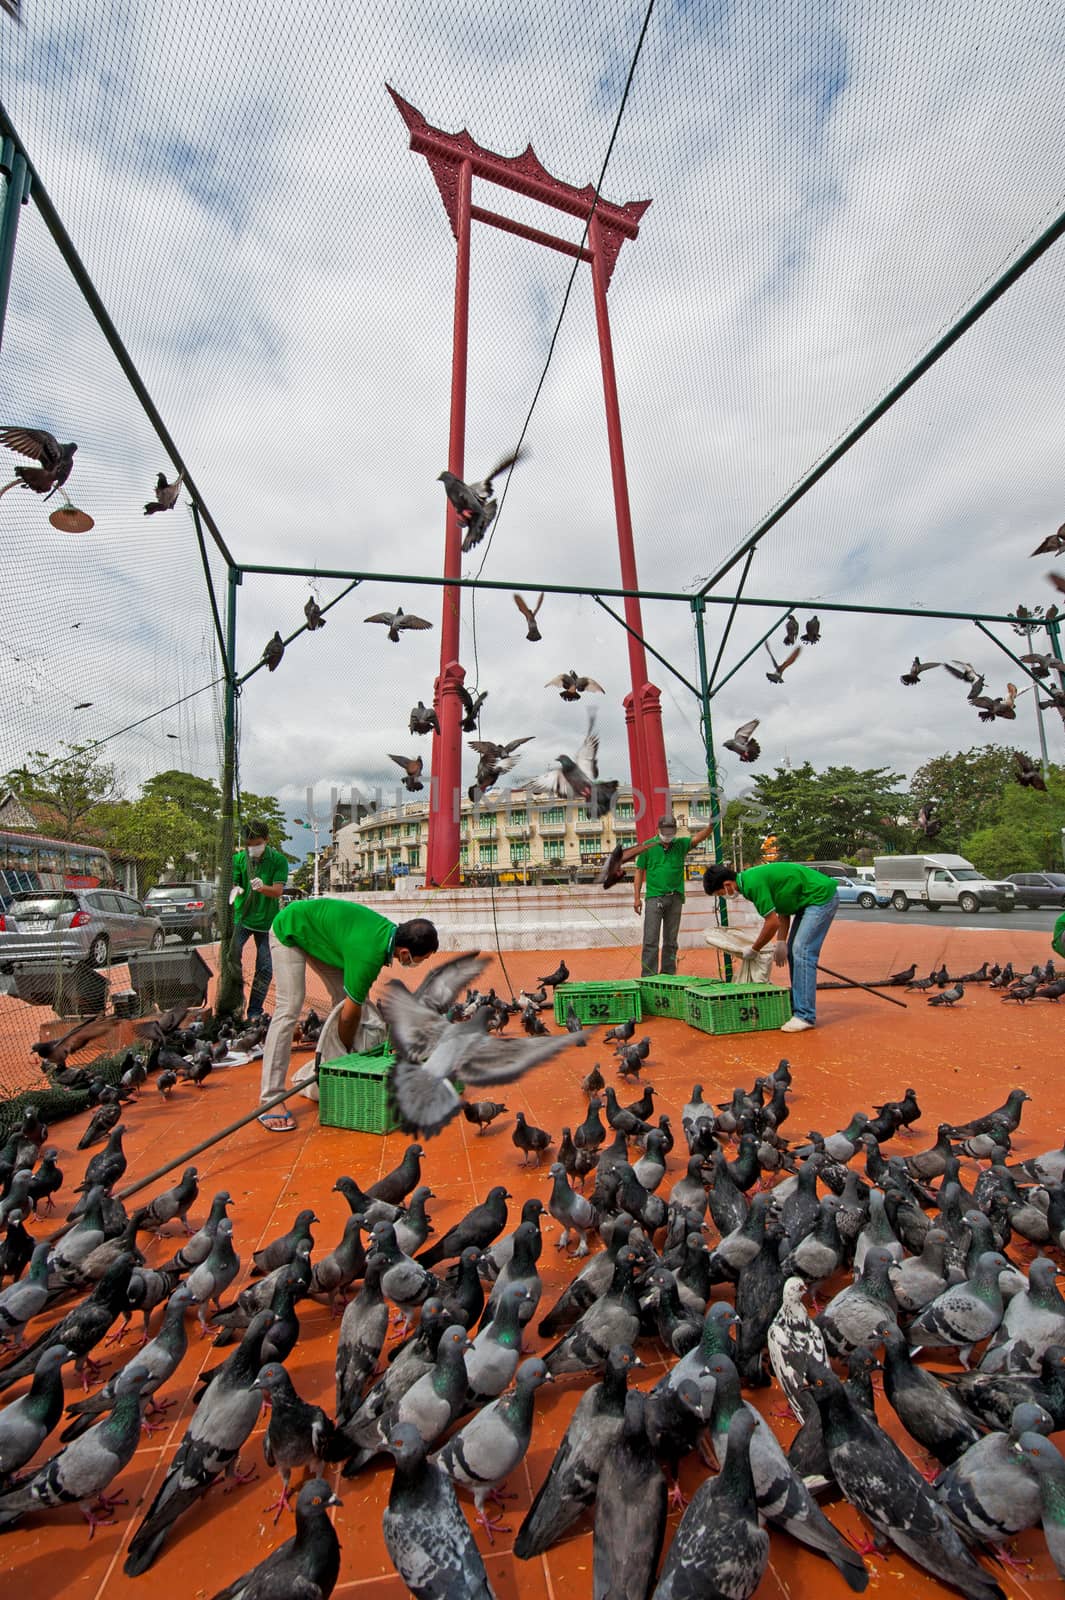 catch the Pigeons protect bird flu in Bangkok, Thailand. by think4photop